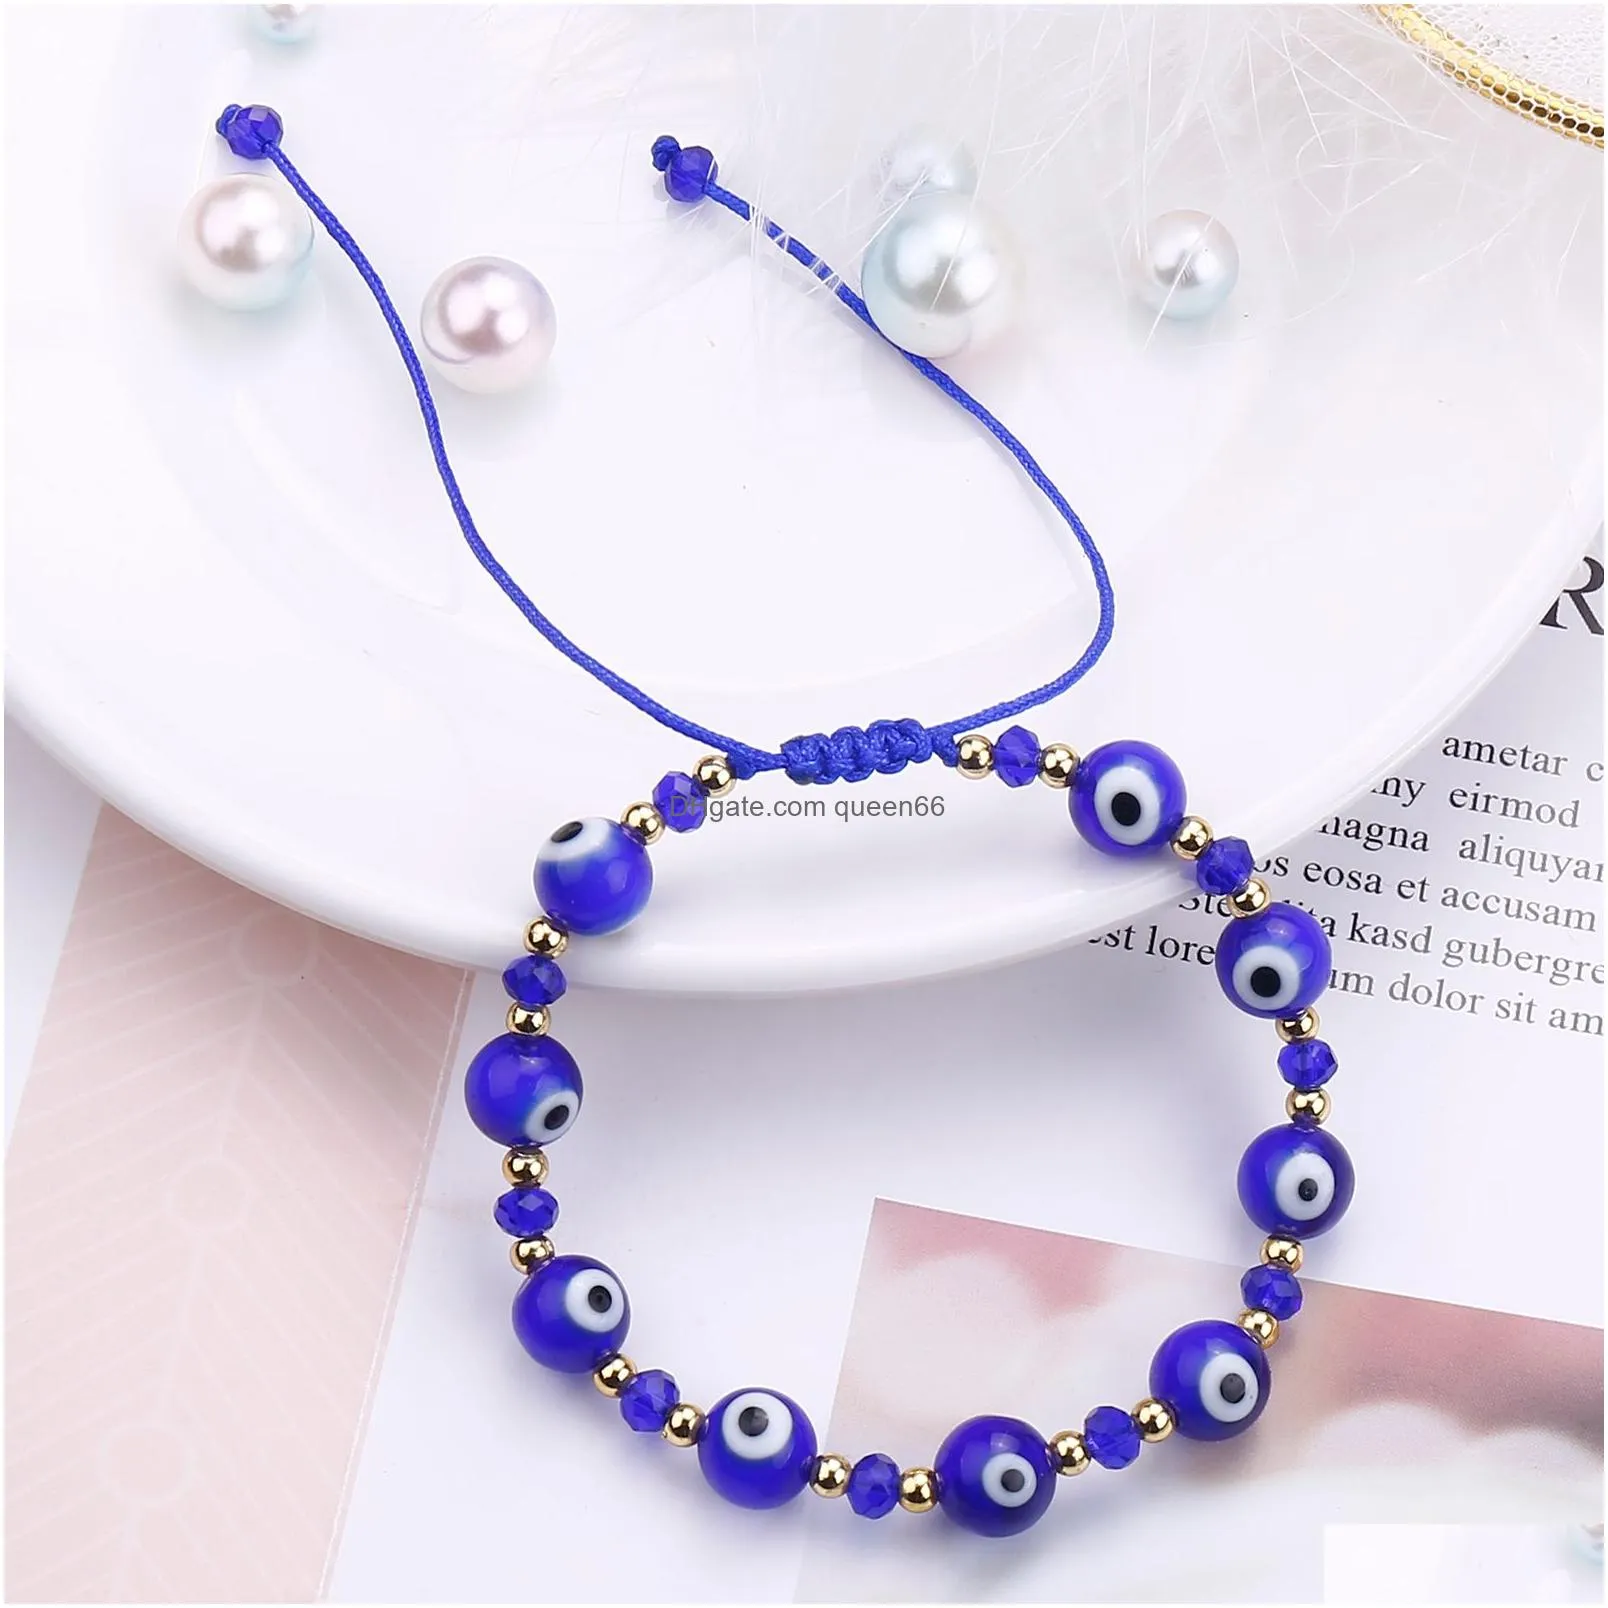 turkish evil blue eye beads bracelet braided rope chain colorful crystal beads bracelets for women handmade jewelry gifts